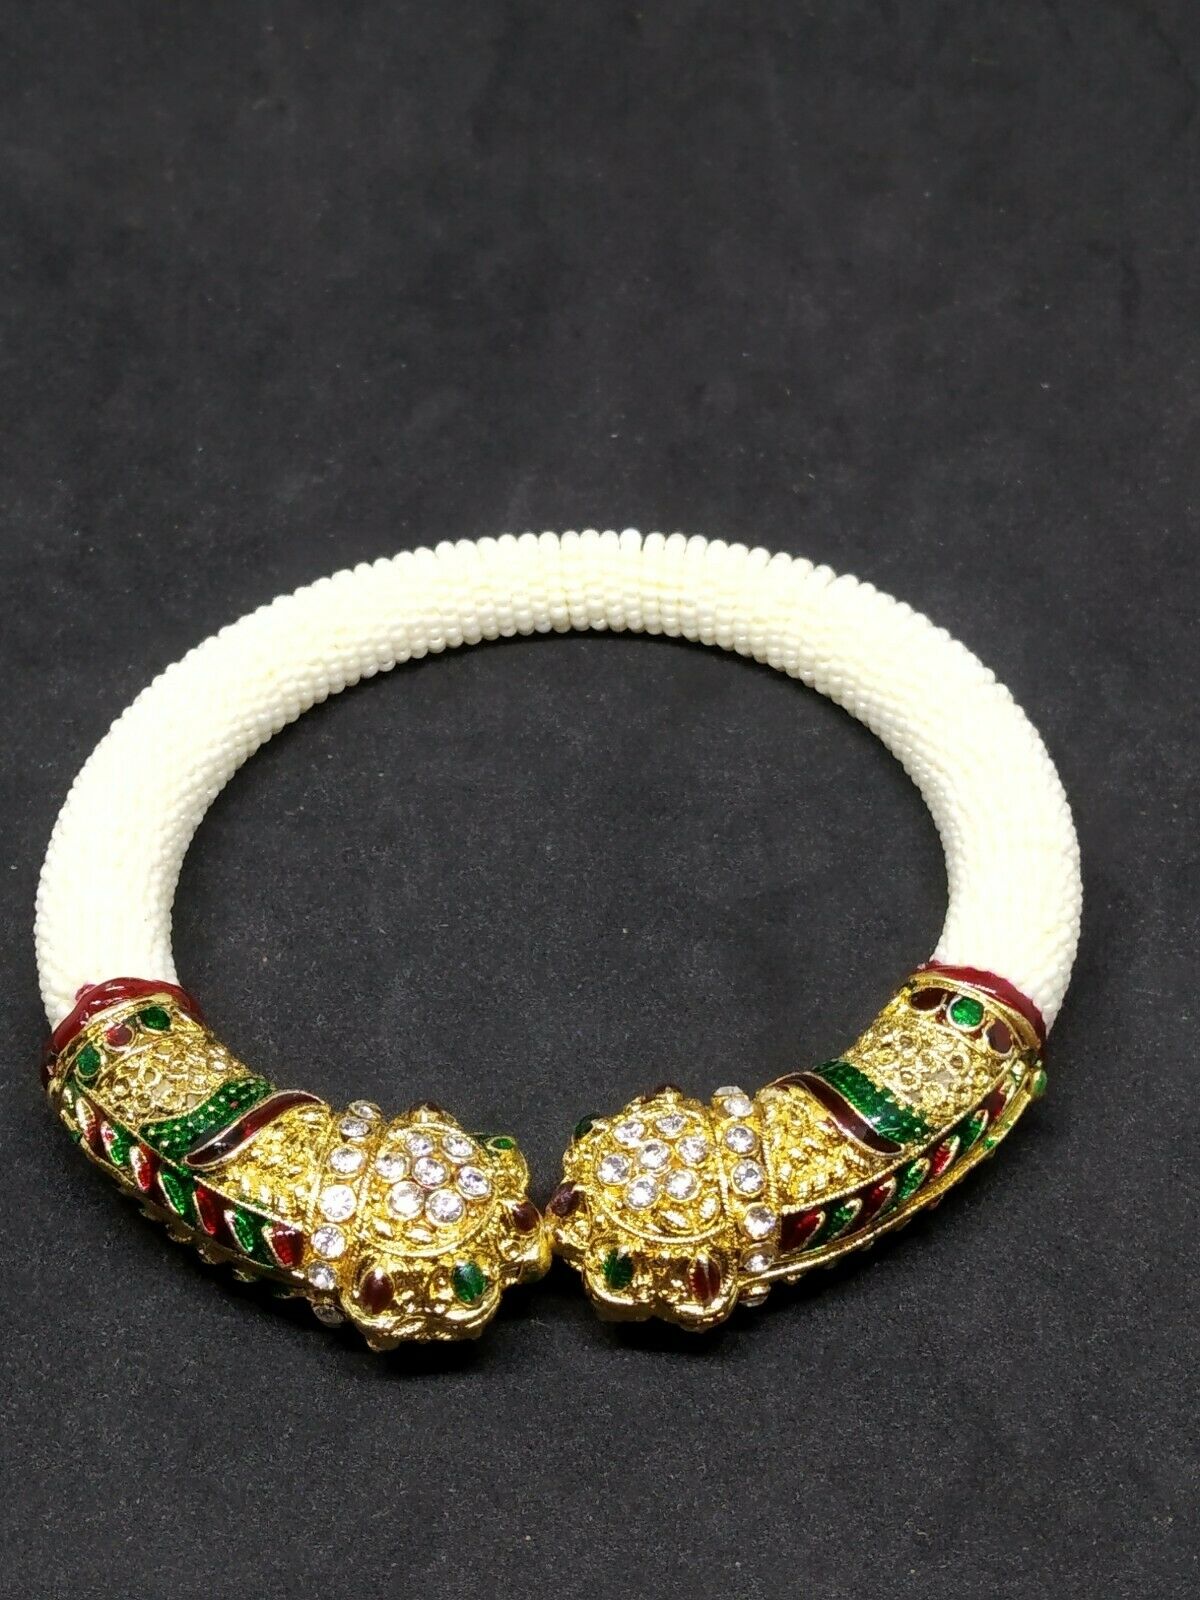 925 Sterling silver Traditional cultural design meenakari (color enamel )bangles  bracelet brides trendy style jewelry from india nba362 | TRIBAL ORNAMENTS